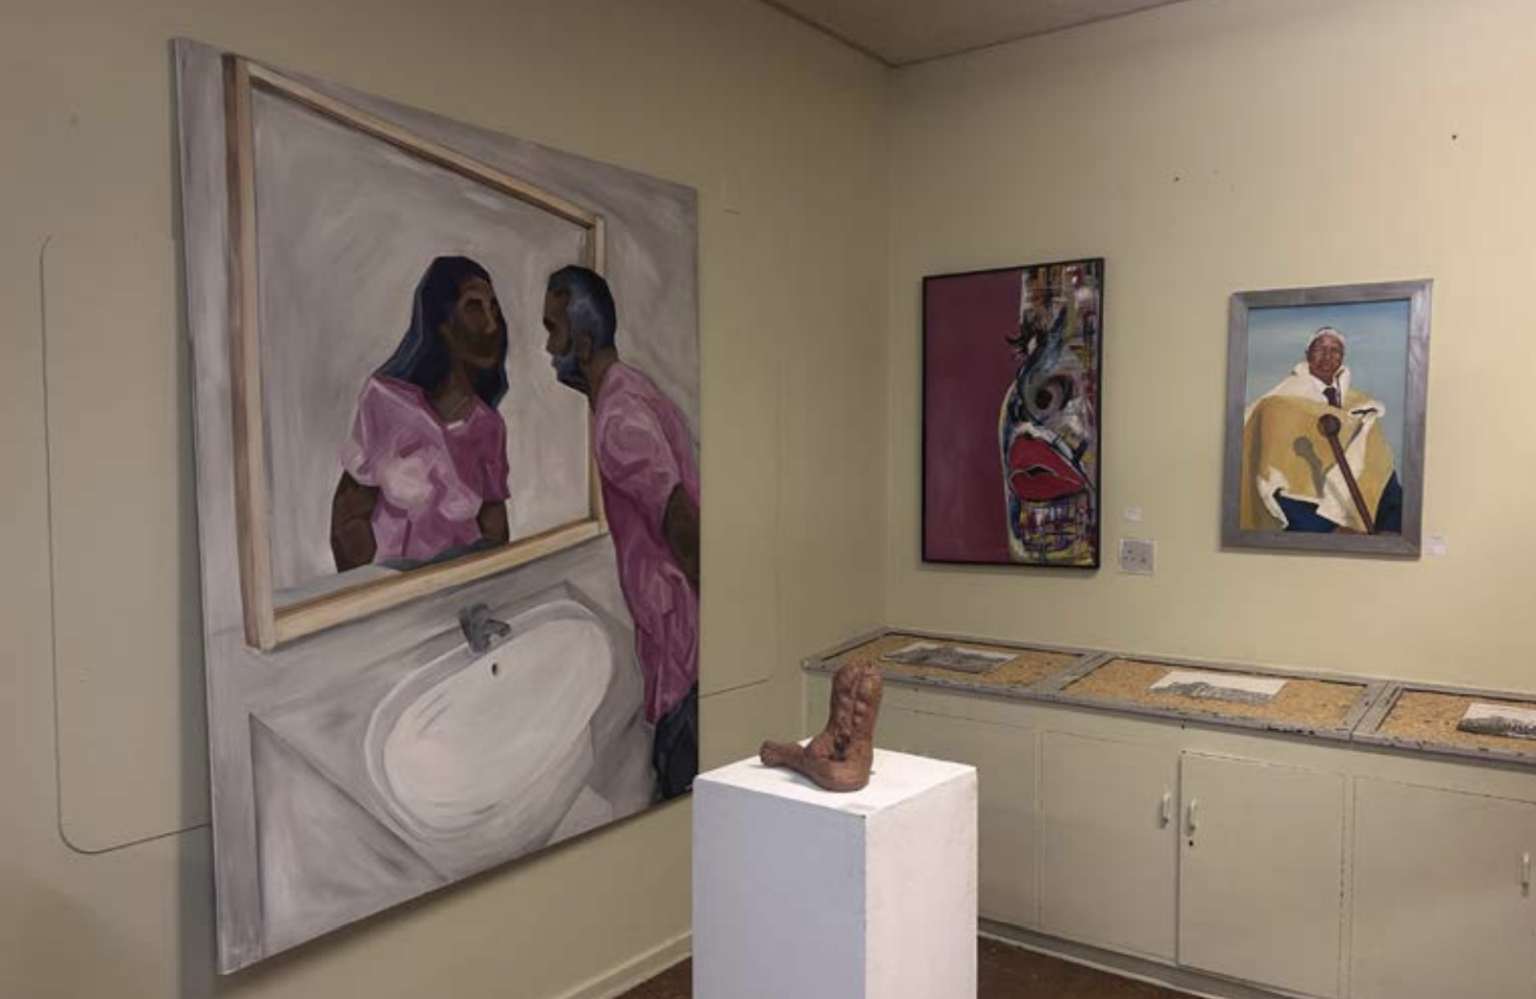 The University of Fort Hare Exhibition features a variety of mixed-media artworks which is shown for the first time in Makhanda. Photographed by Ruvesen Naidoo